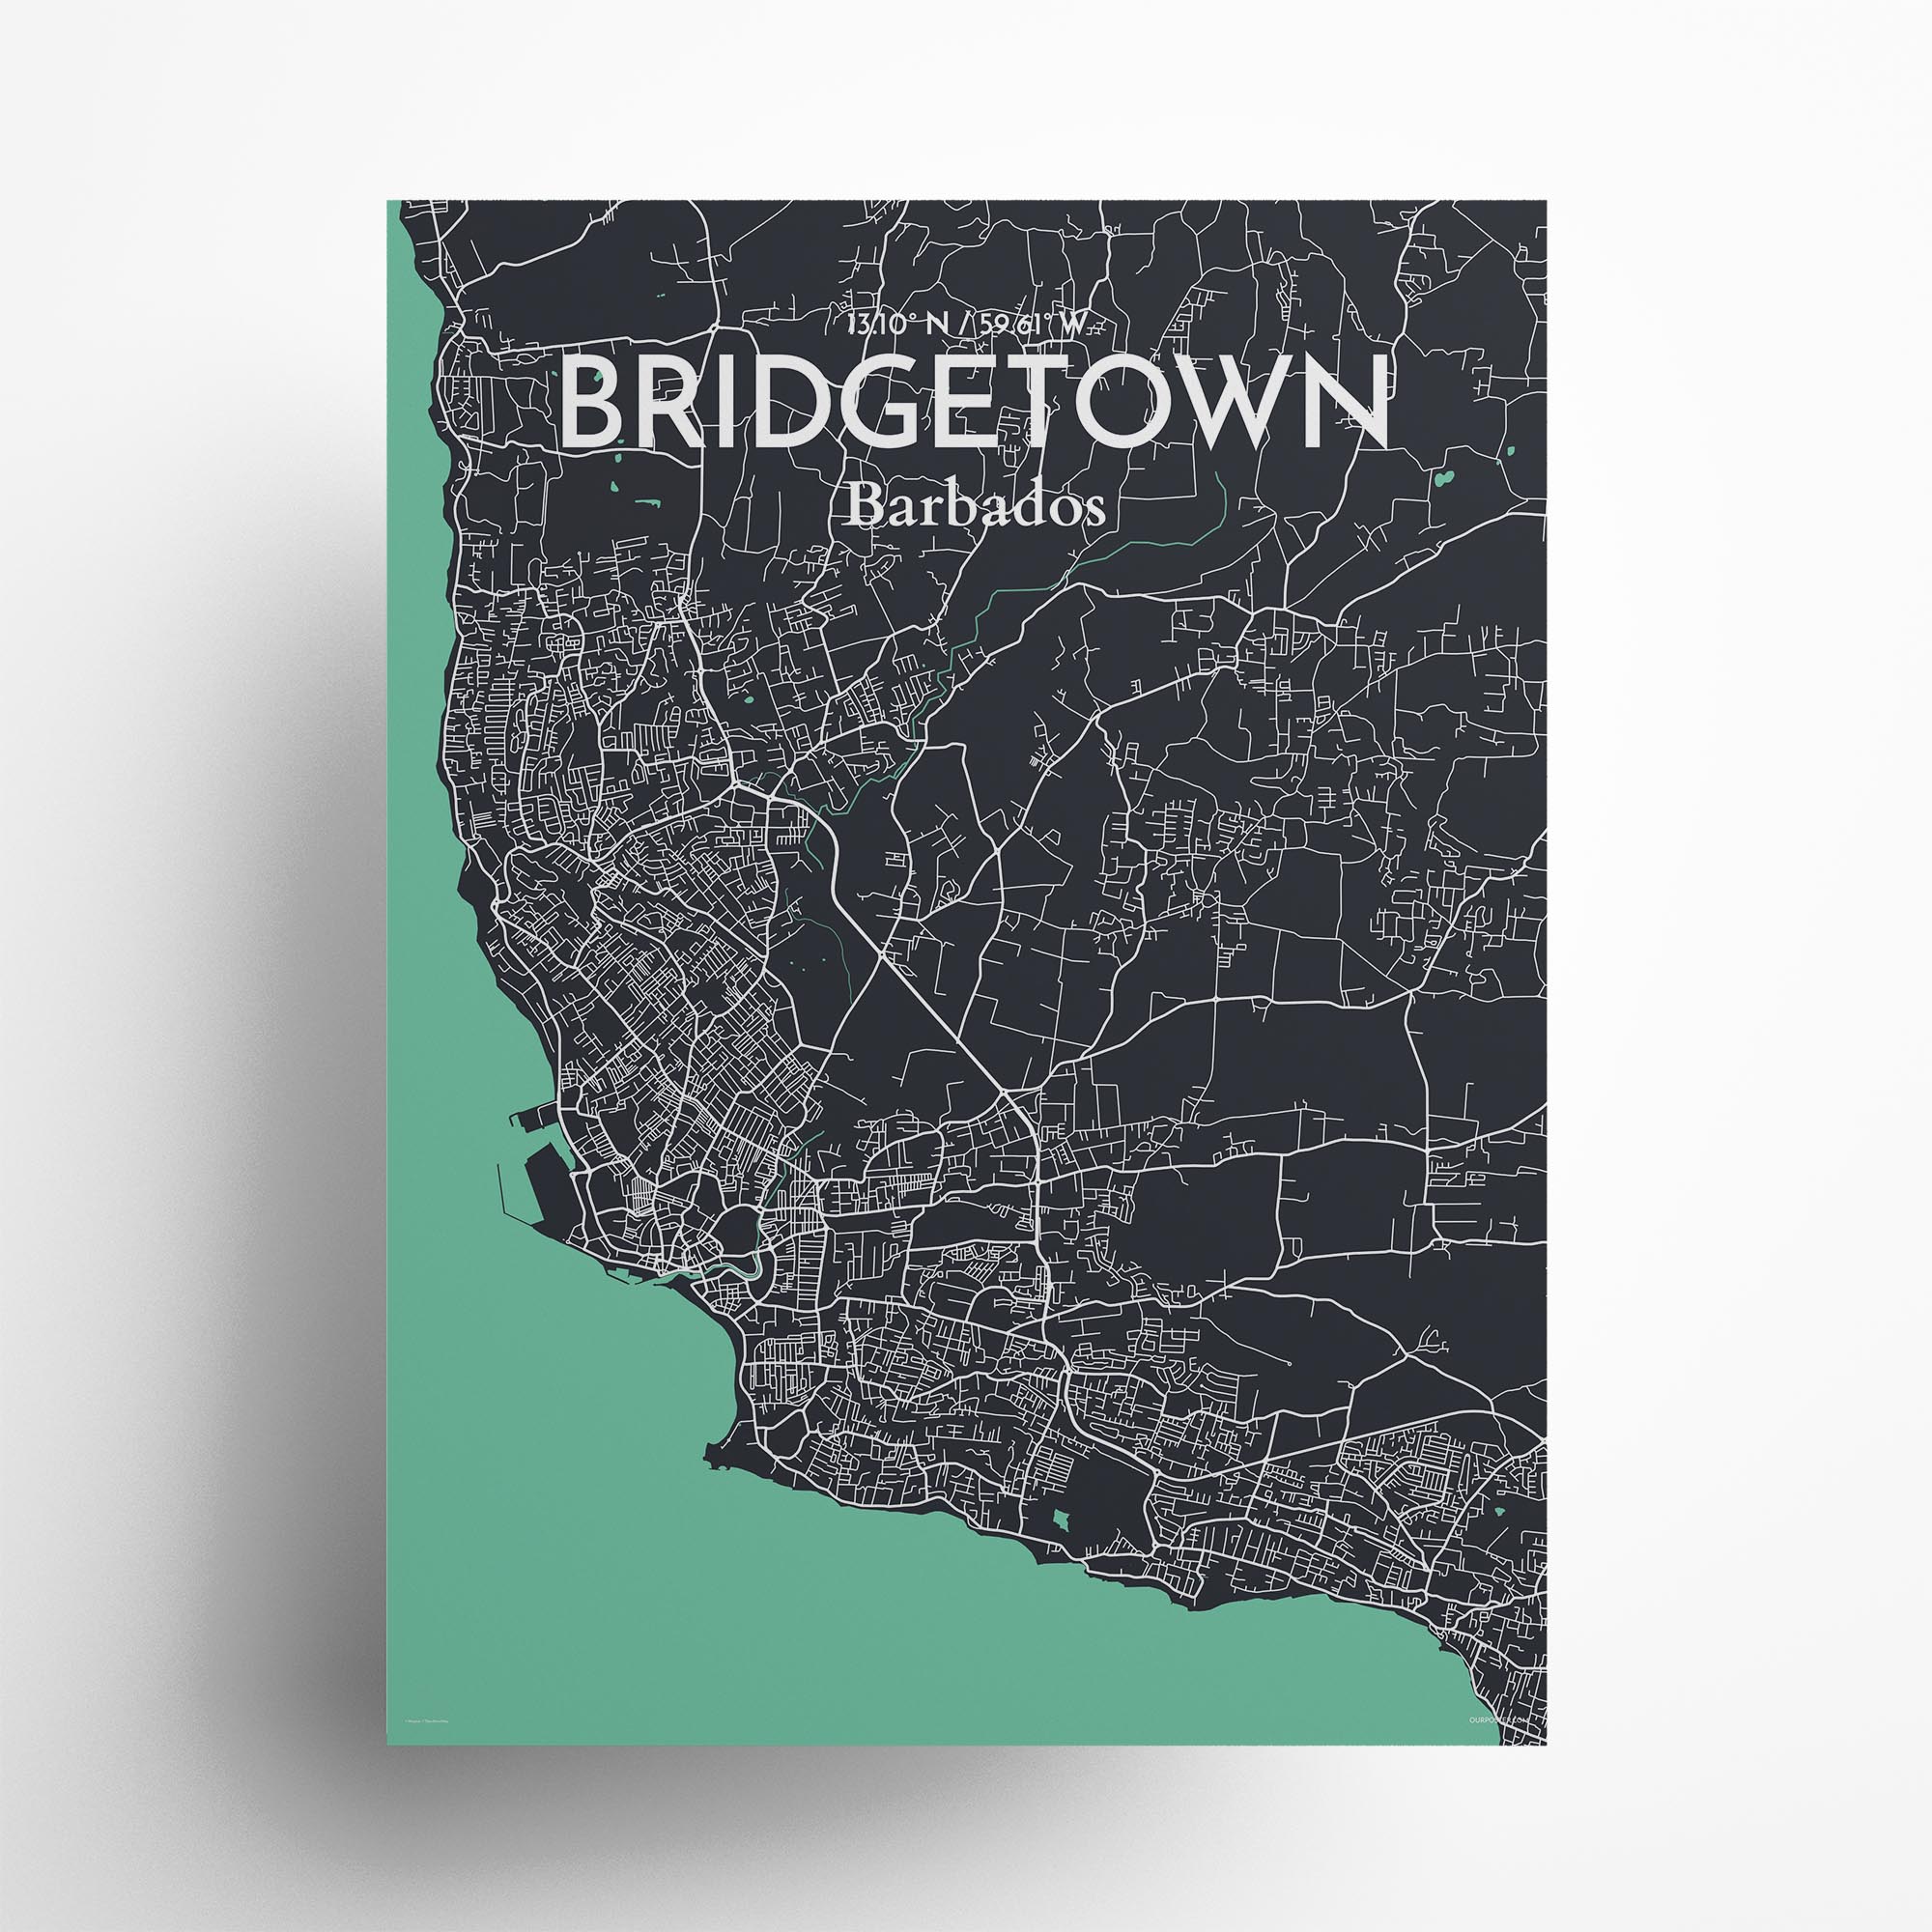 Bridgetown city map poster in Dream of size 18" x 24"